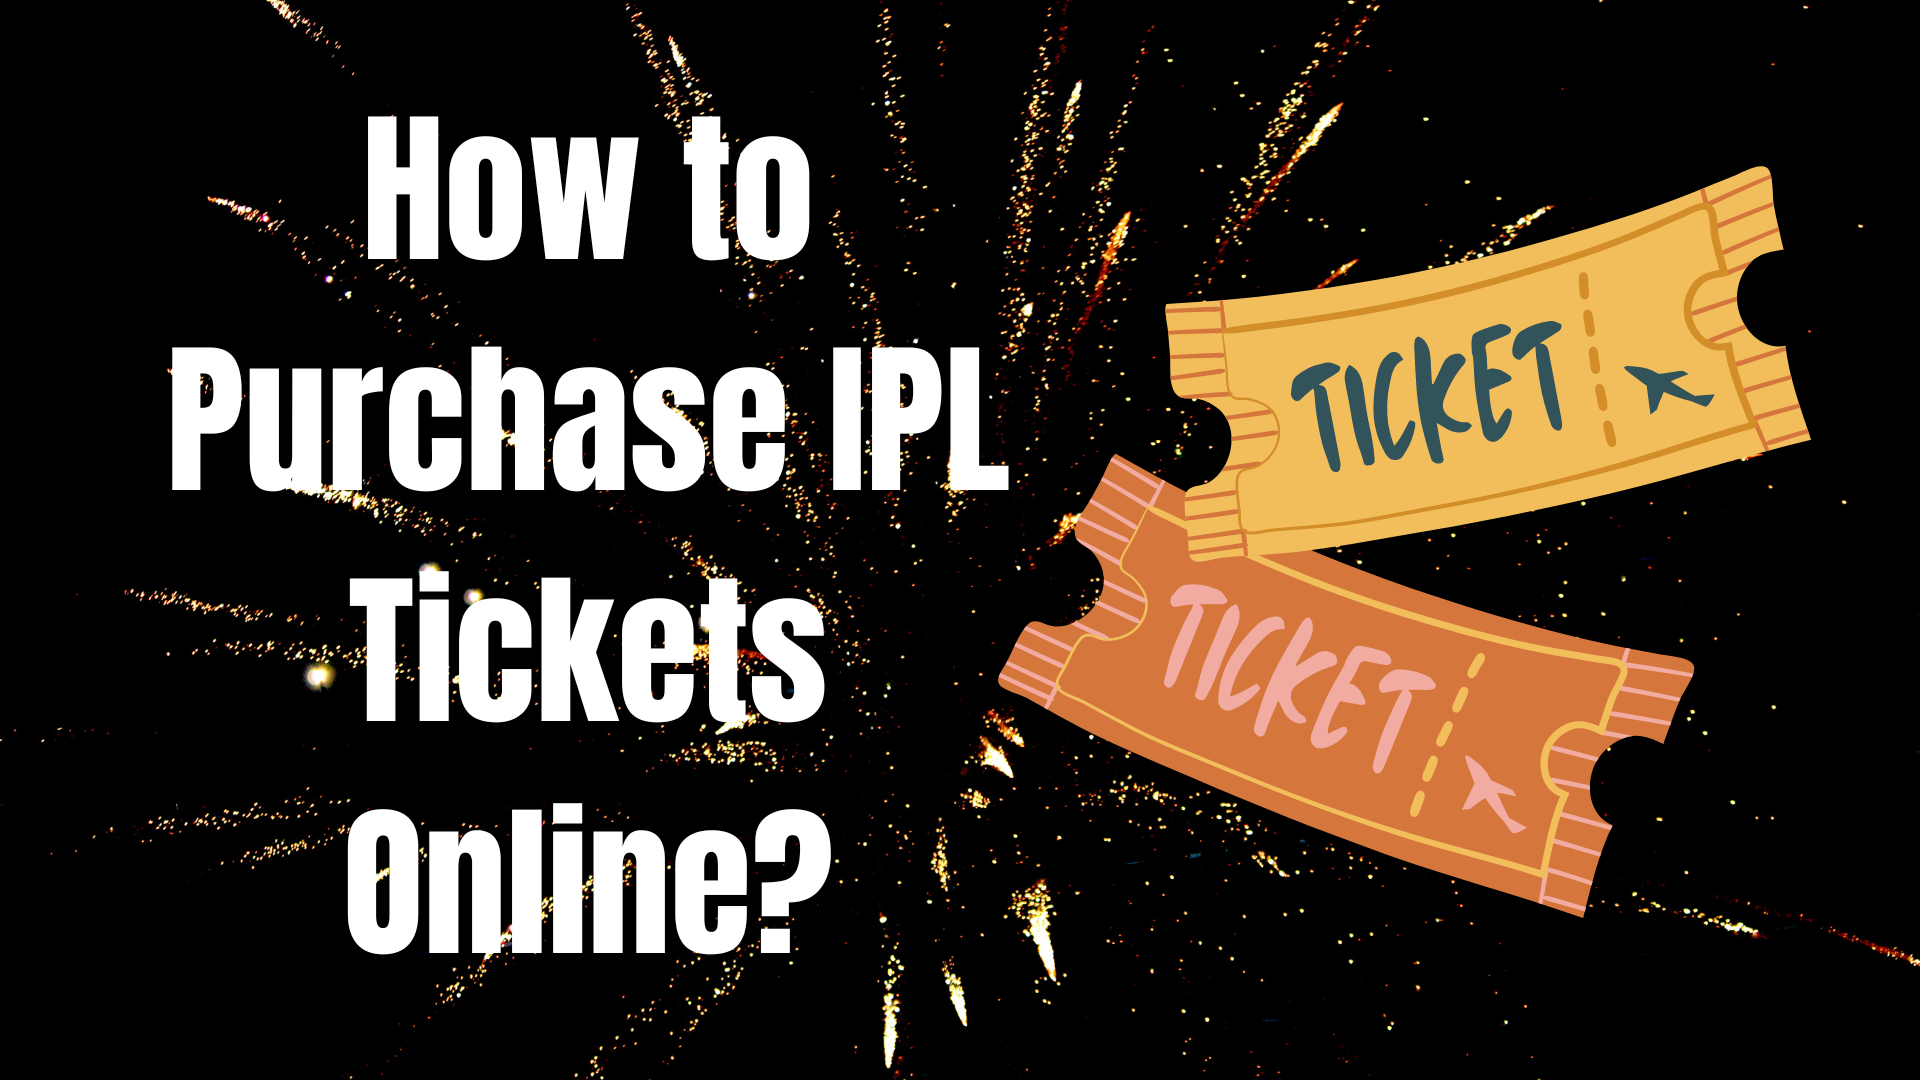 How to Purchase IPL Tickets Online: Step-by-Step Guide